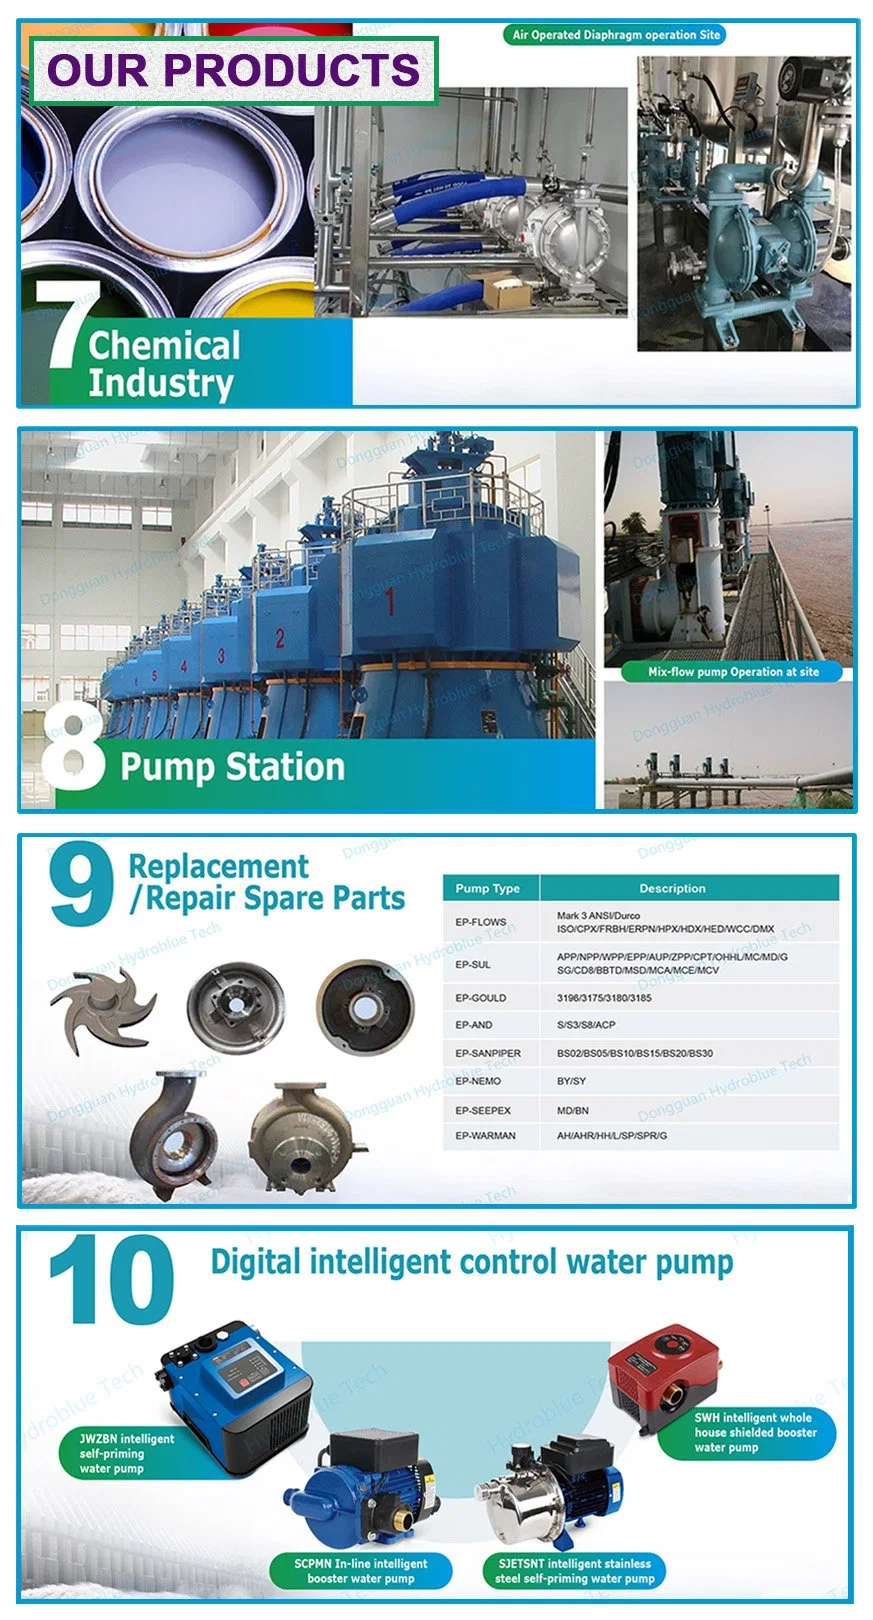 Monobloc / Close-Coupled Centrifugal Electric Pump Foot-Mounted Two-Stage Overhung Pumps.